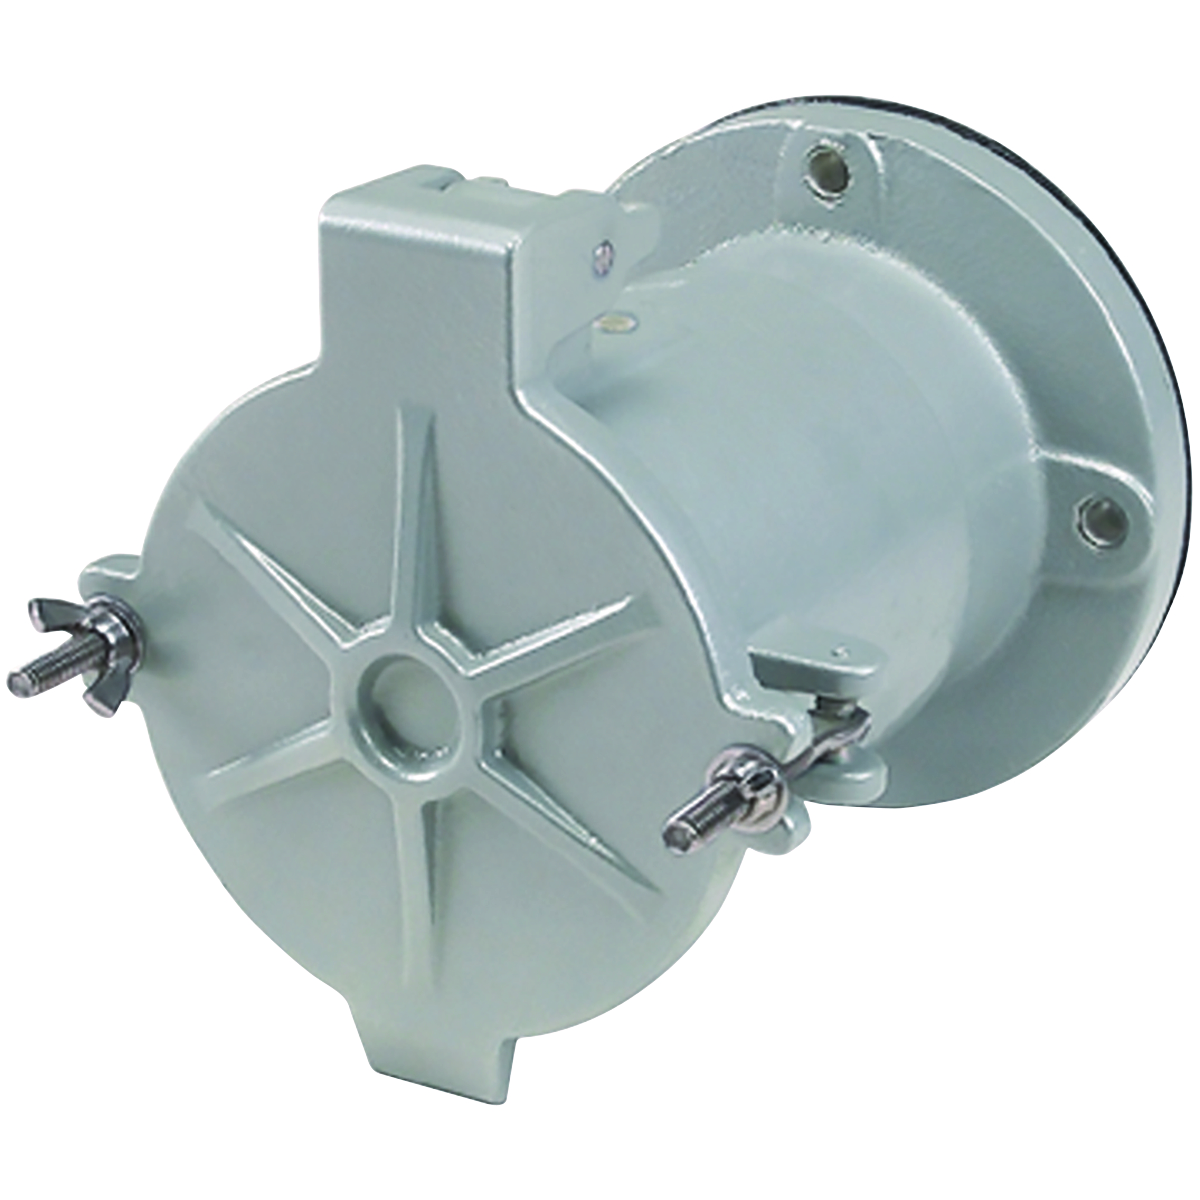 Versamate Series 200A 3 Pole 4 Wire Receptacle Assembly - Reverse